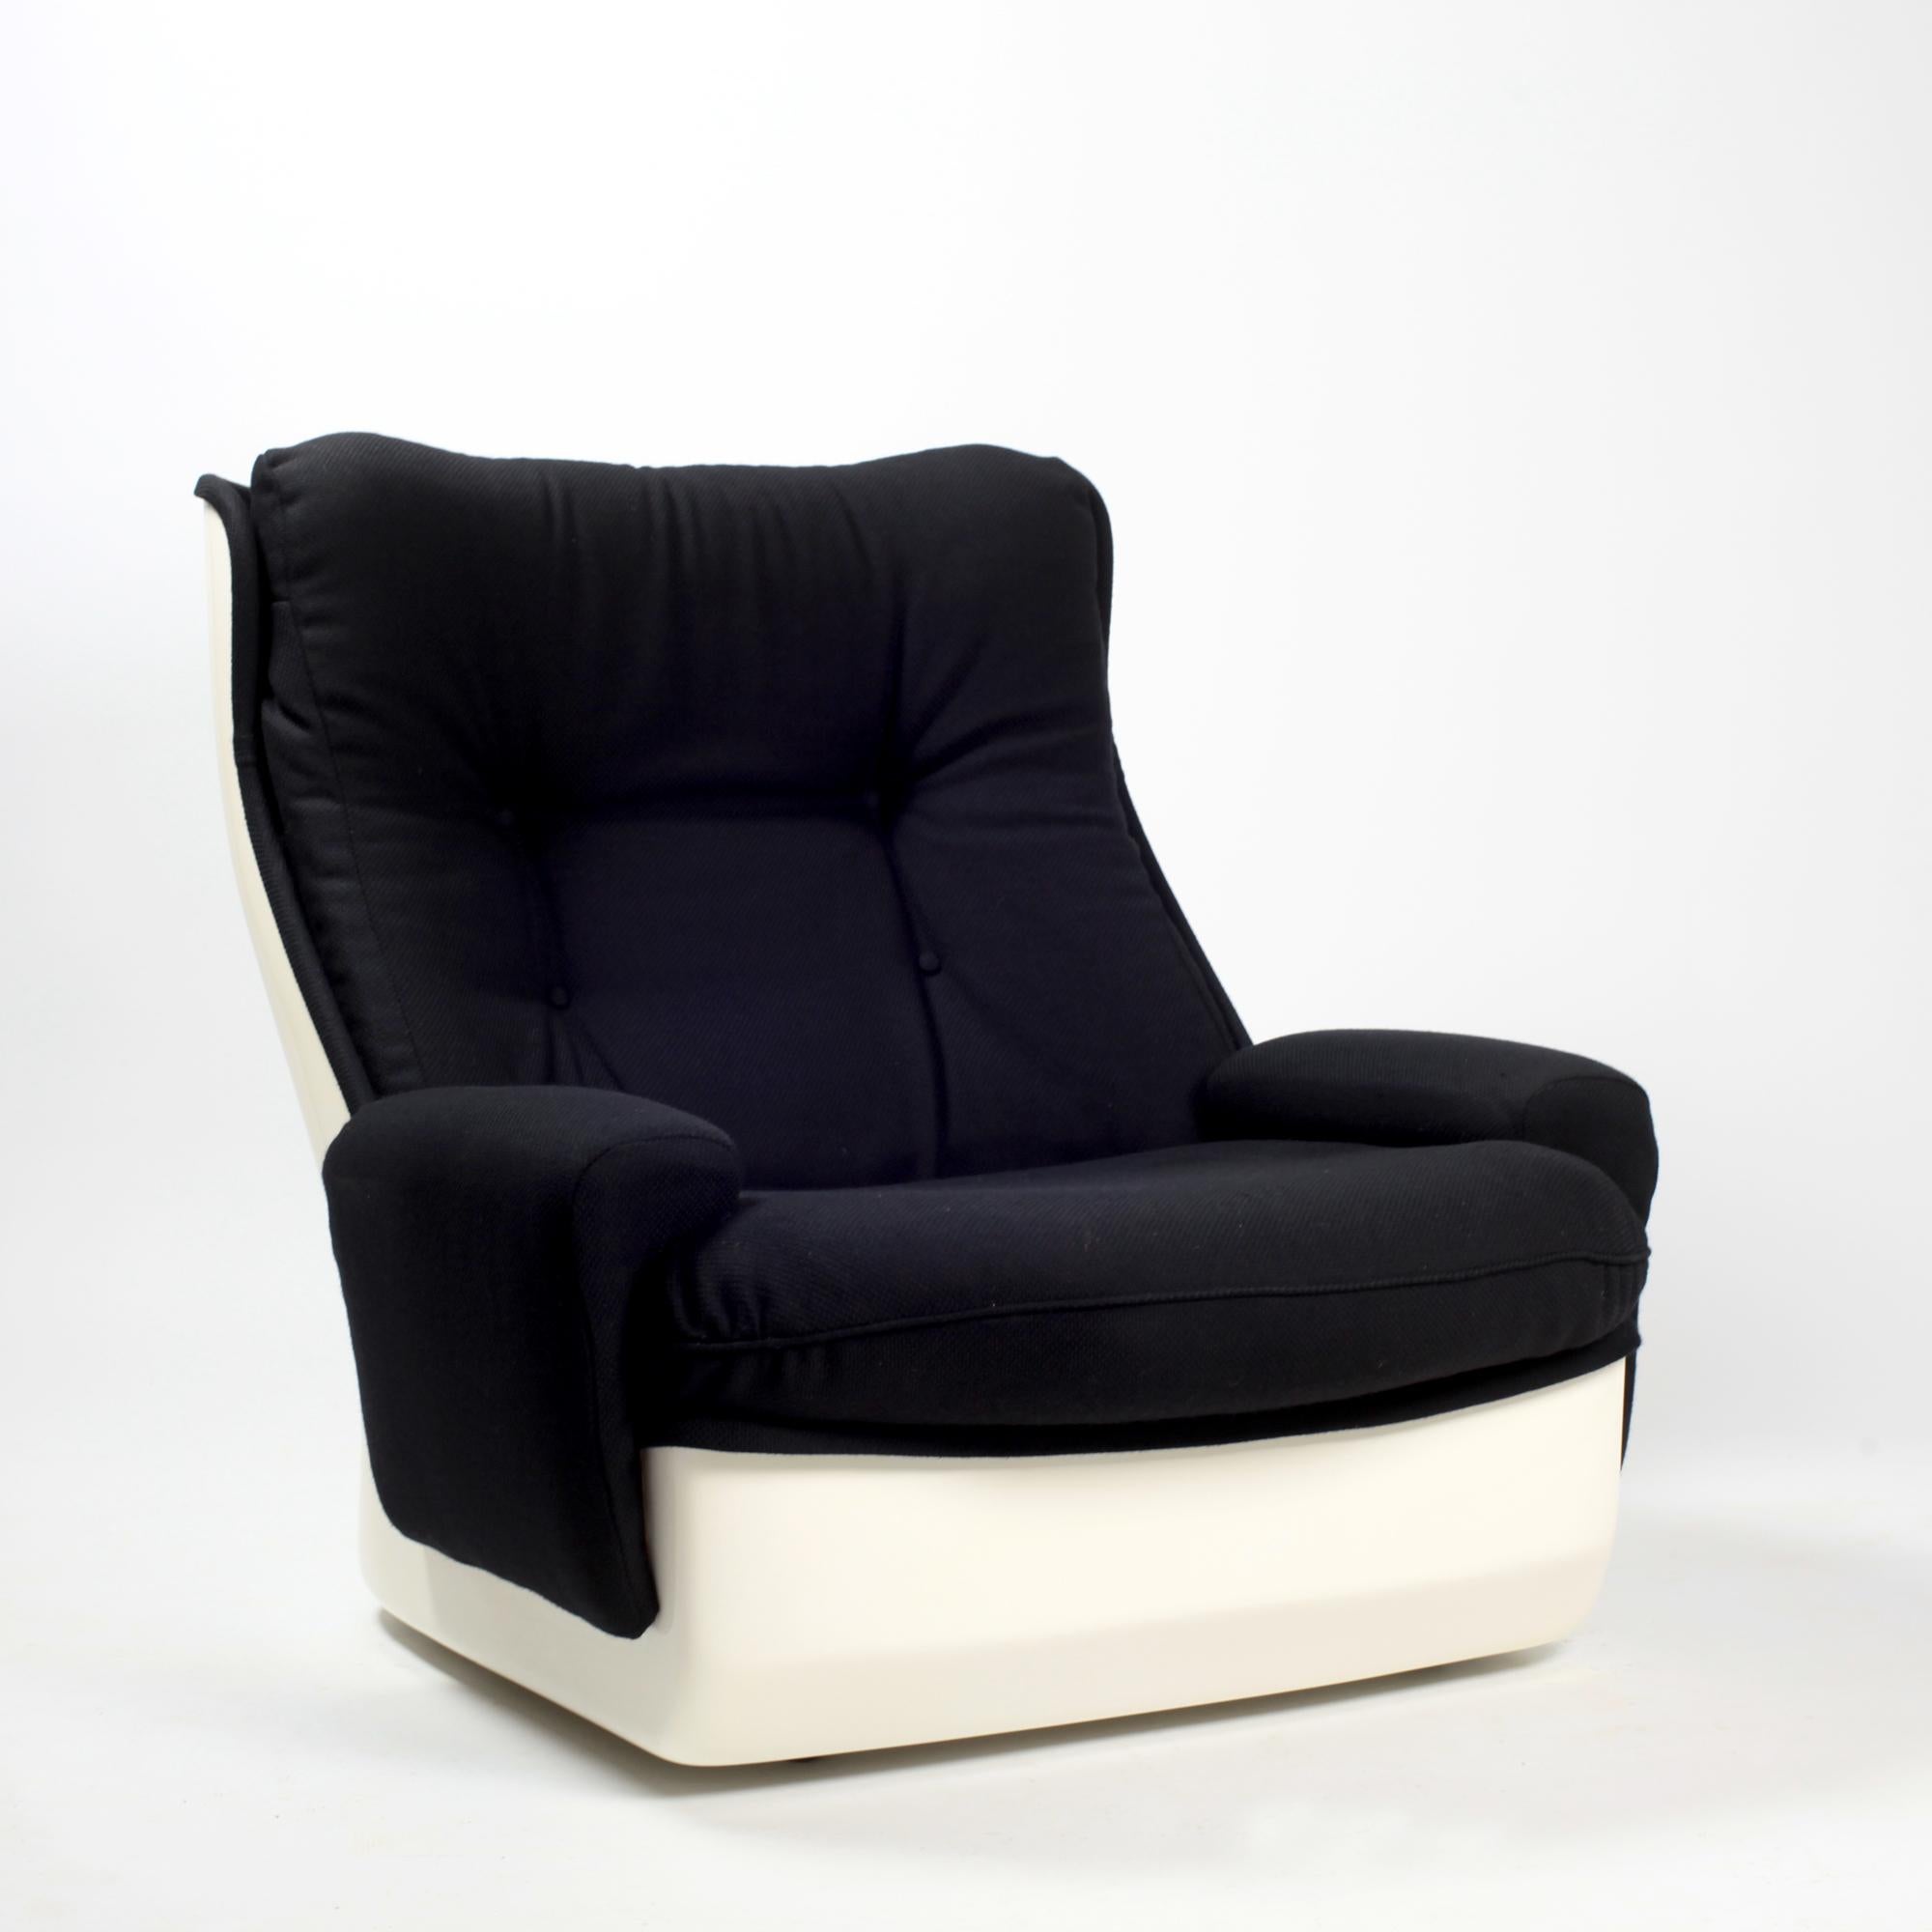 Large and very comfy lounge chair model 530 designed by Michel Cadestin and produced by Airbone France 1960s.
This armchair feature white lacquered fiberglass shell and original black upholstery in very good condition.
Stands on four